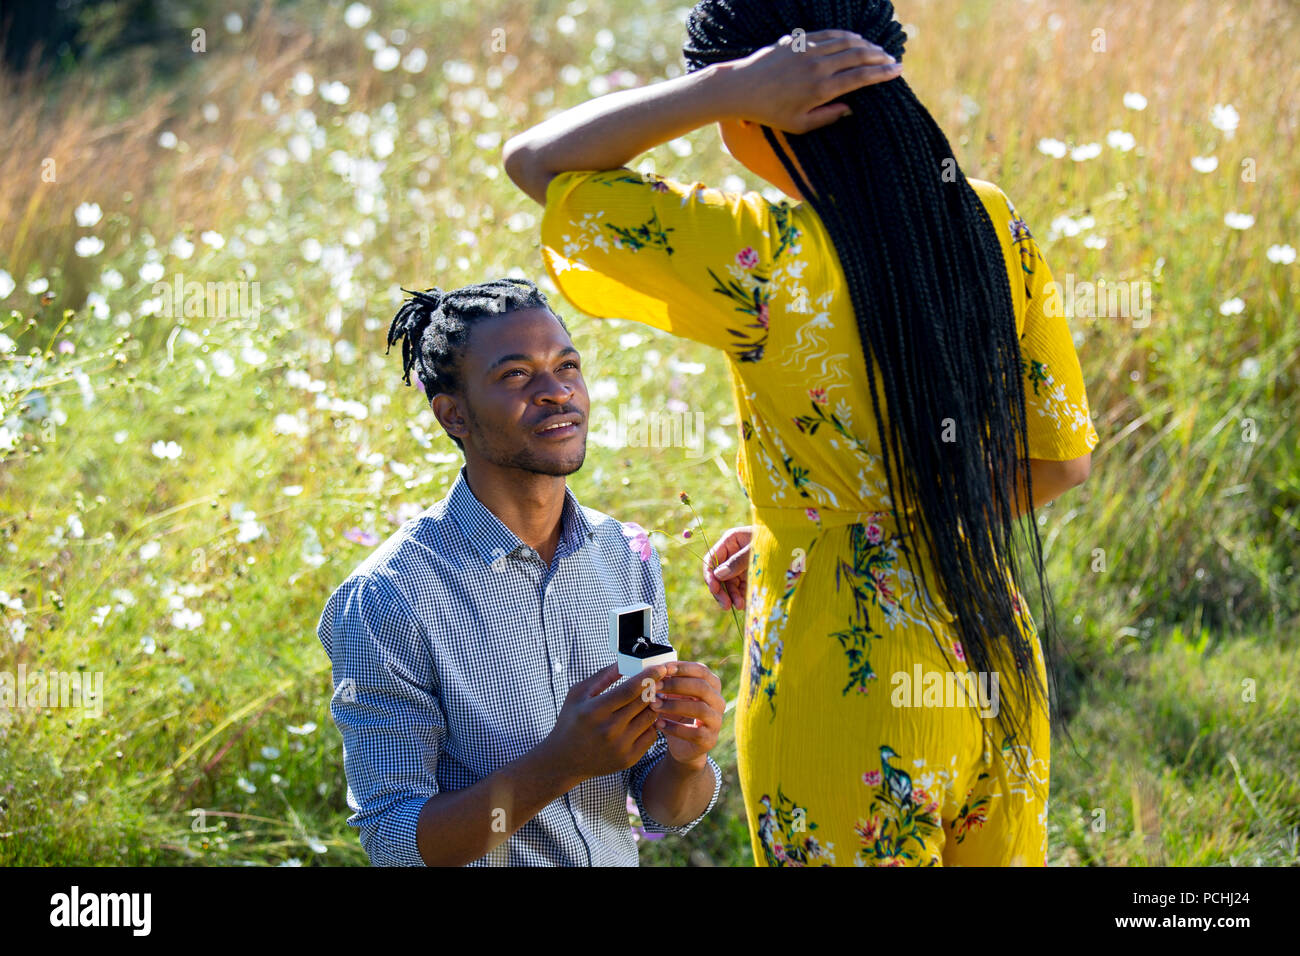 African man proposing to African woman in field Stock Photo